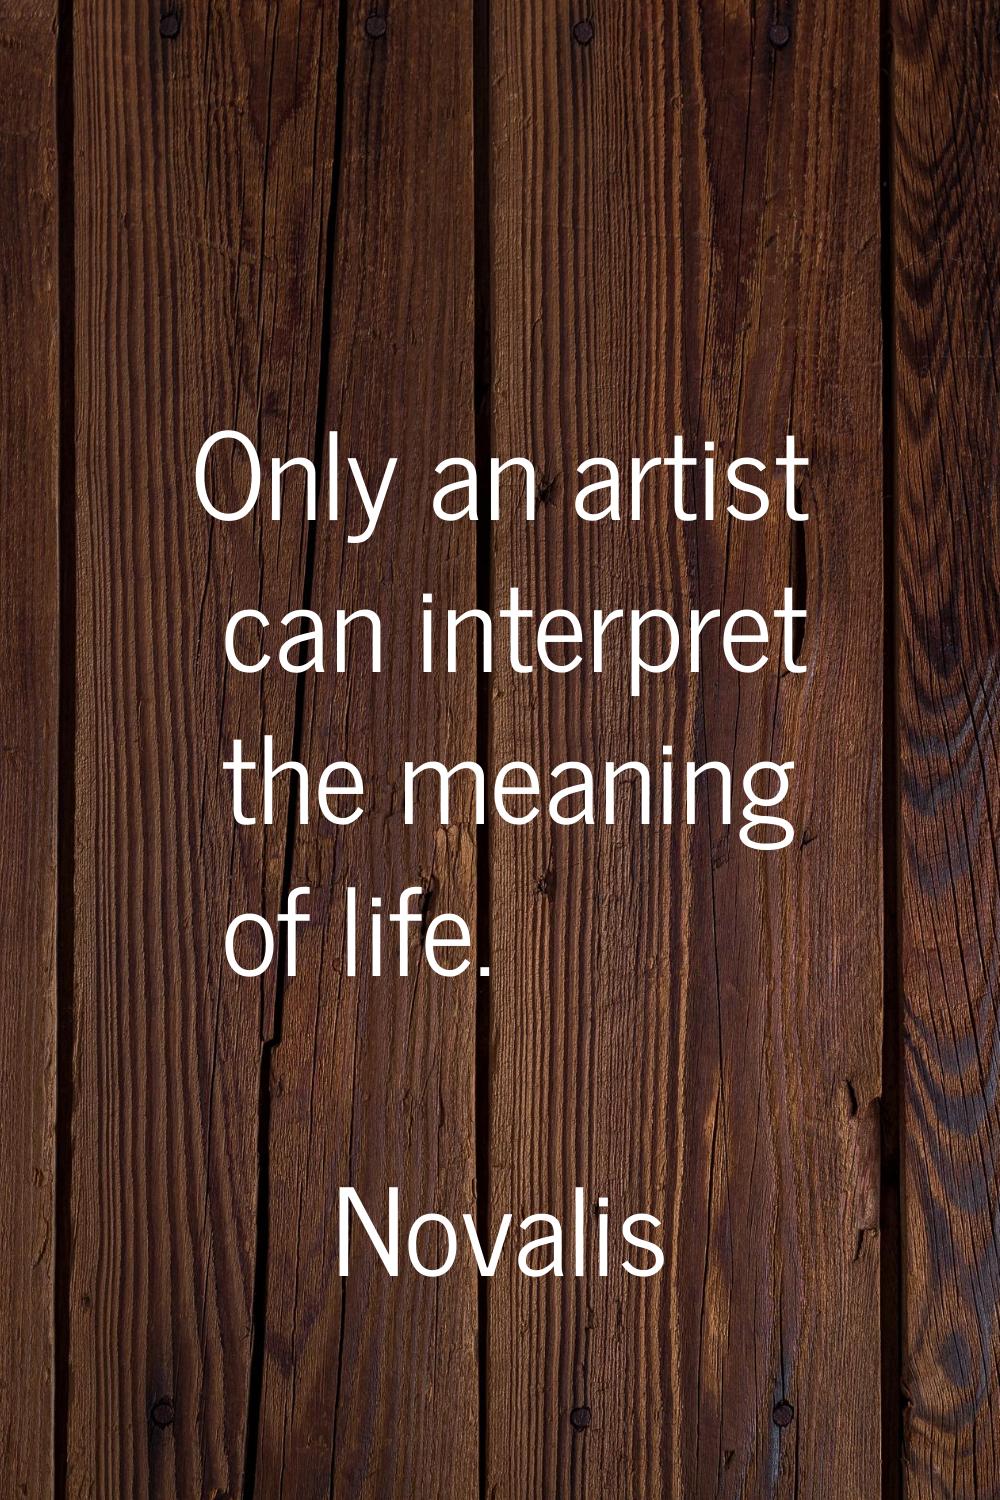 Only an artist can interpret the meaning of life.